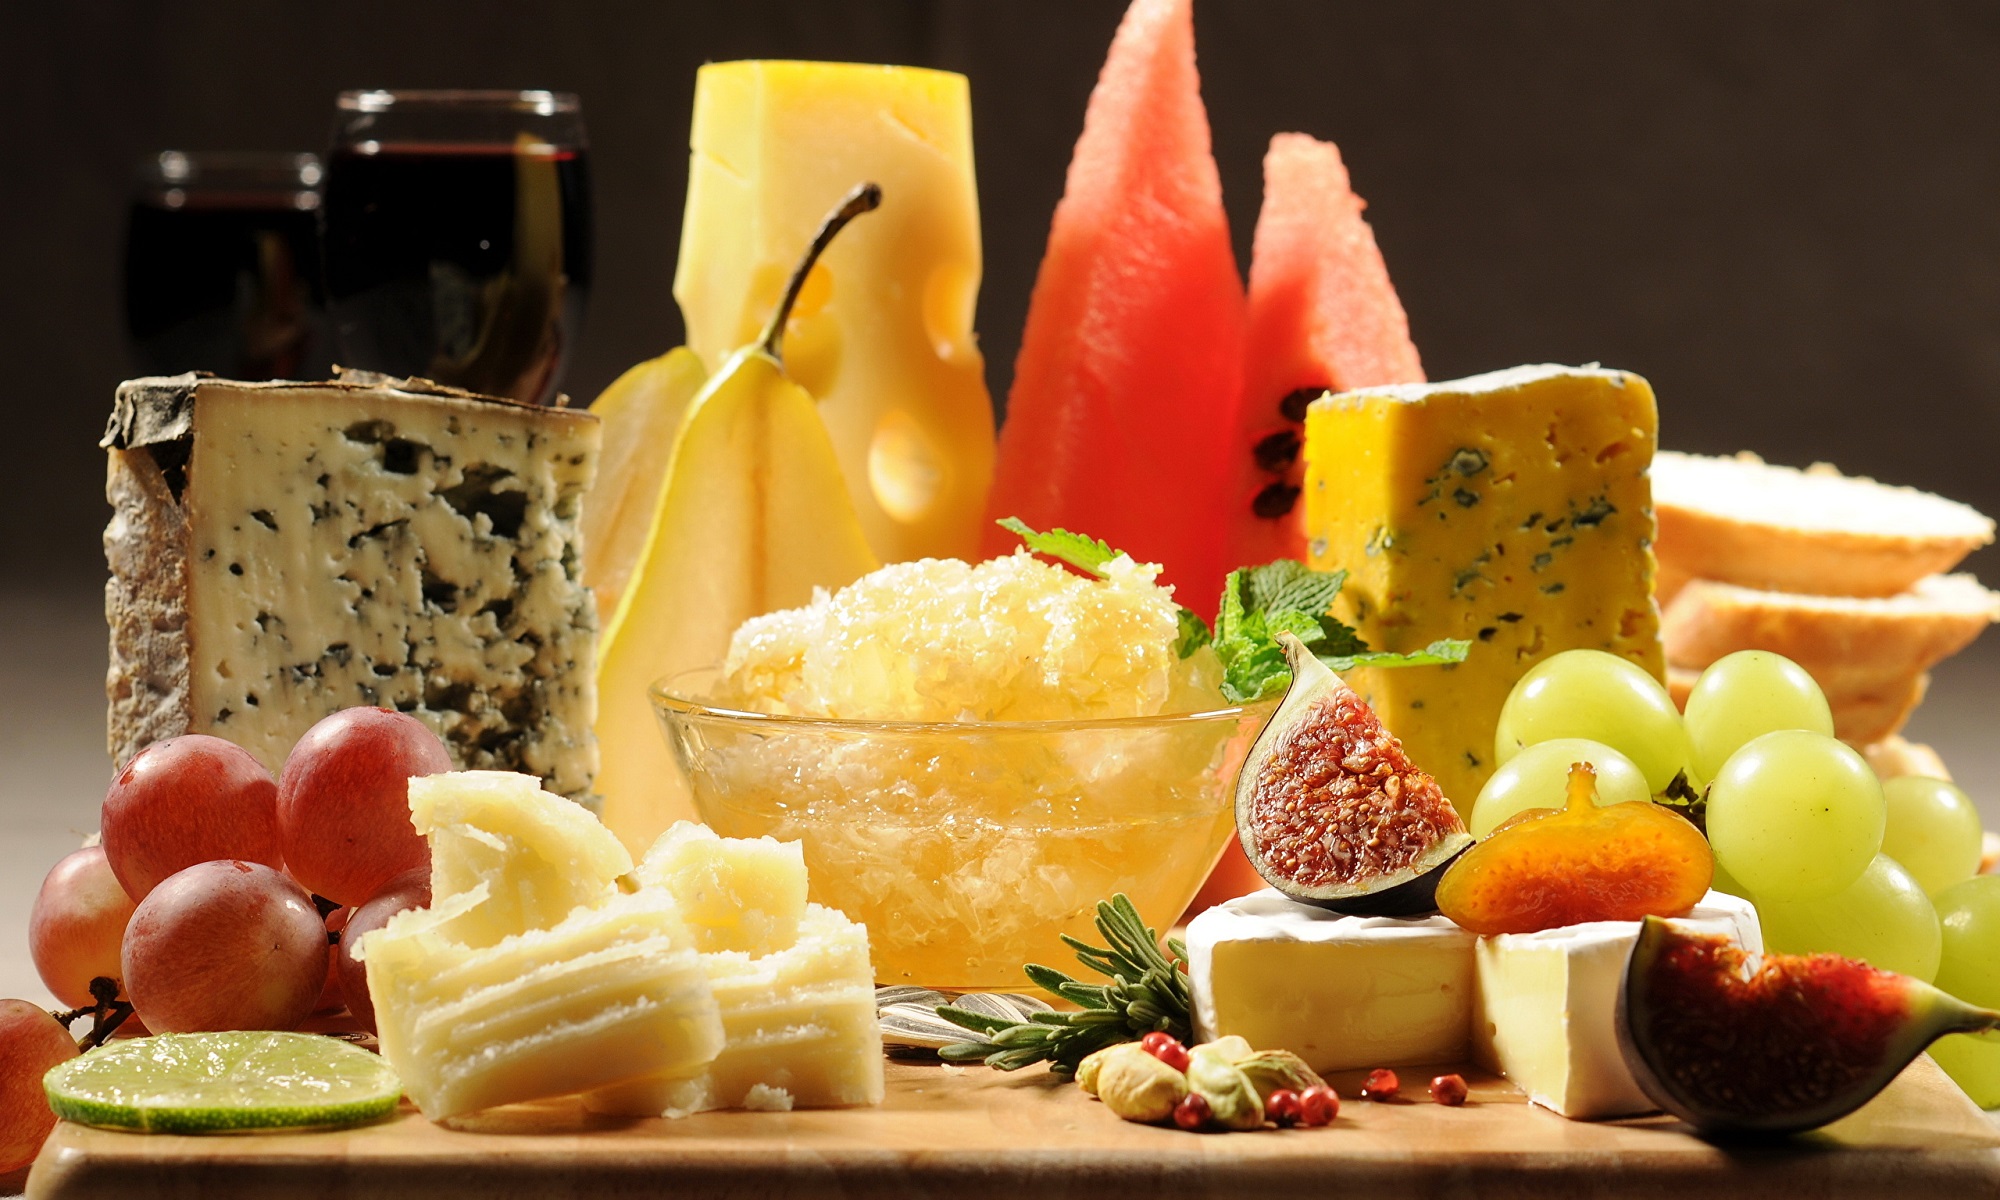 French cheese and fruits.